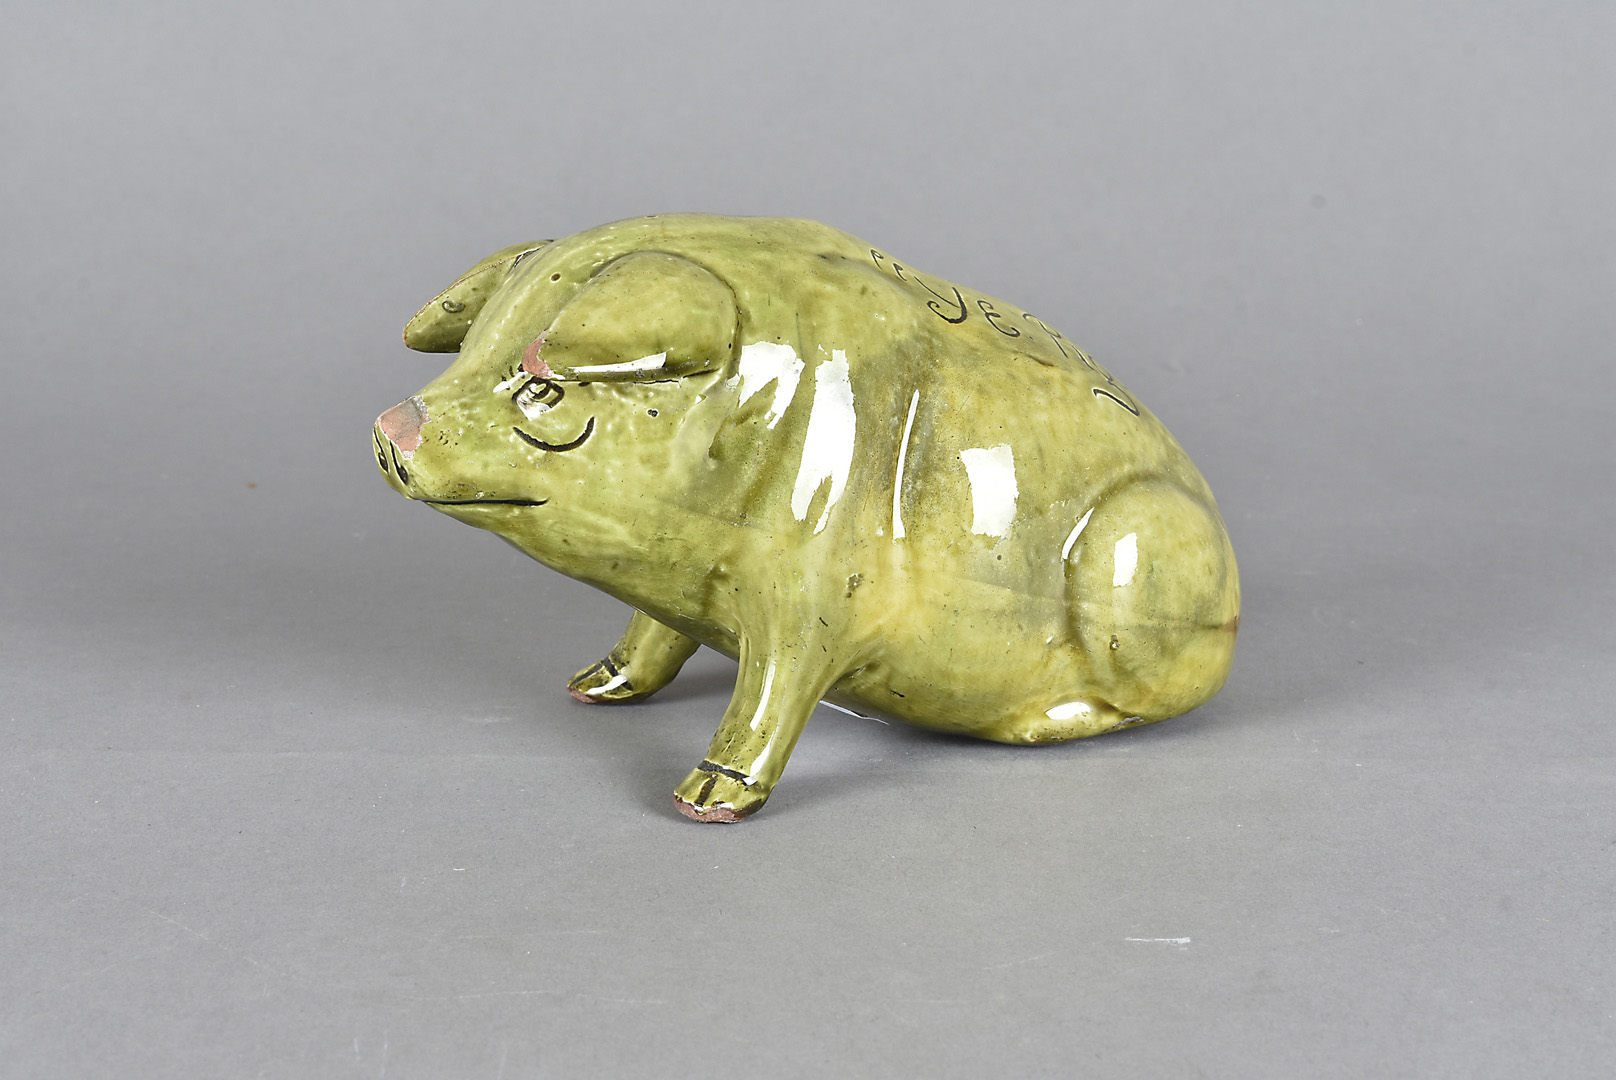 A Ewenny pottery pig, seated, titled Ye Pig dated to base 1900 in green glaze, 17 cm long x 10 cm